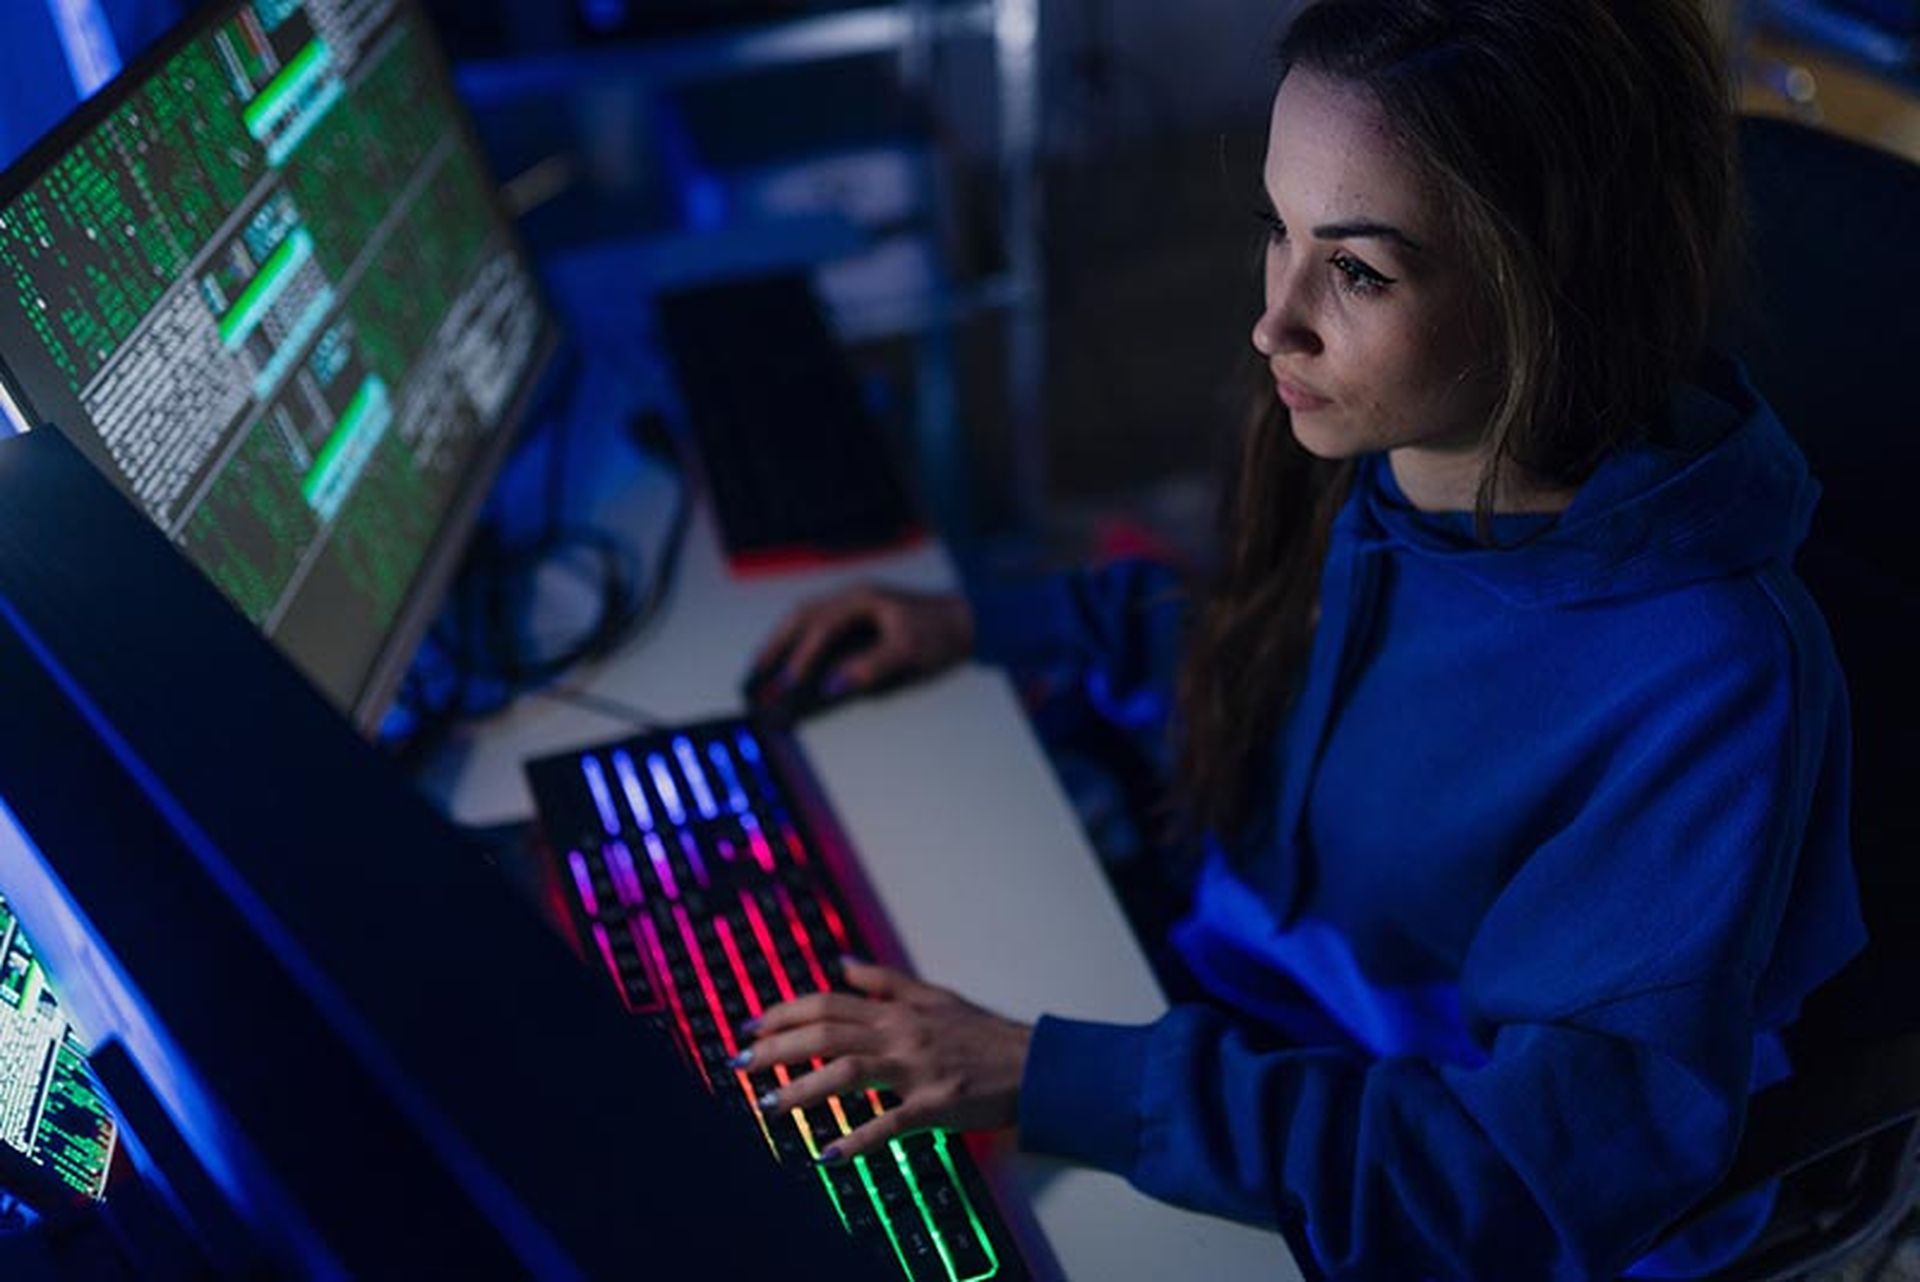 Women in Cybersecurity: The perfect threat modelers